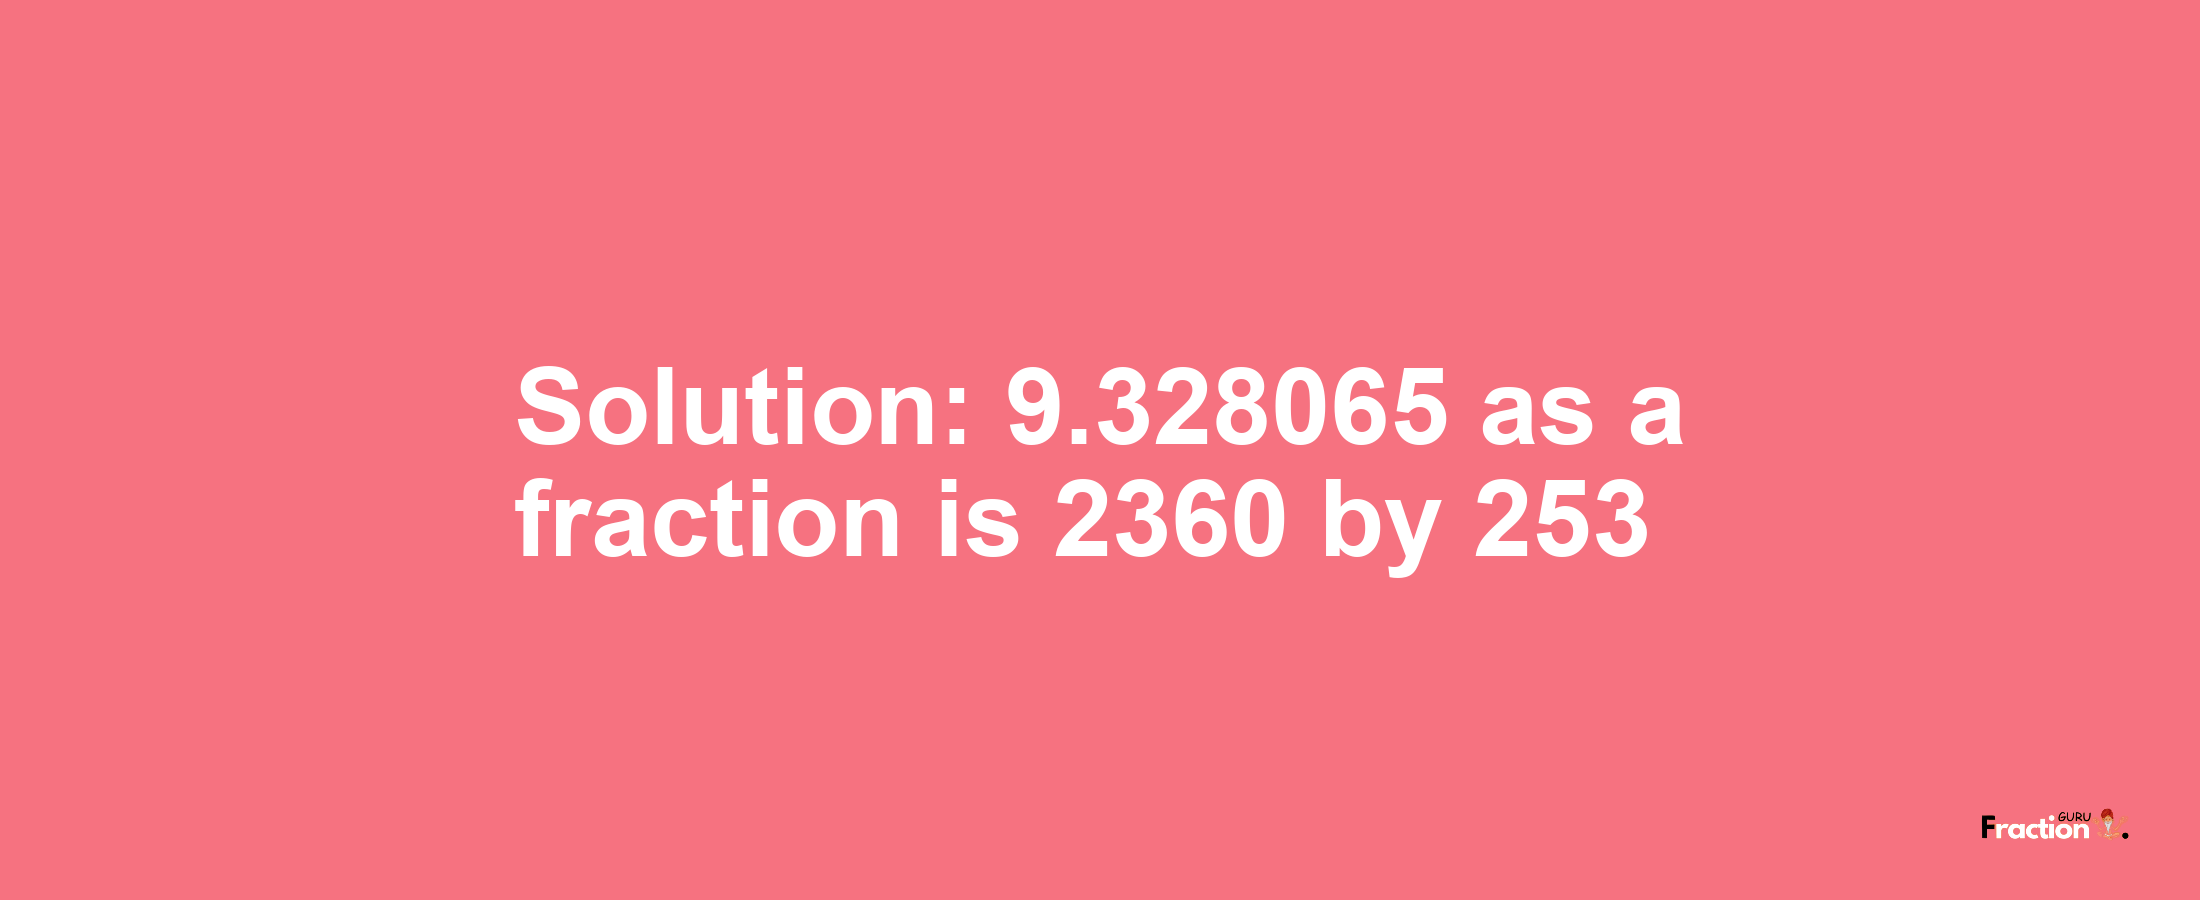 Solution:9.328065 as a fraction is 2360/253